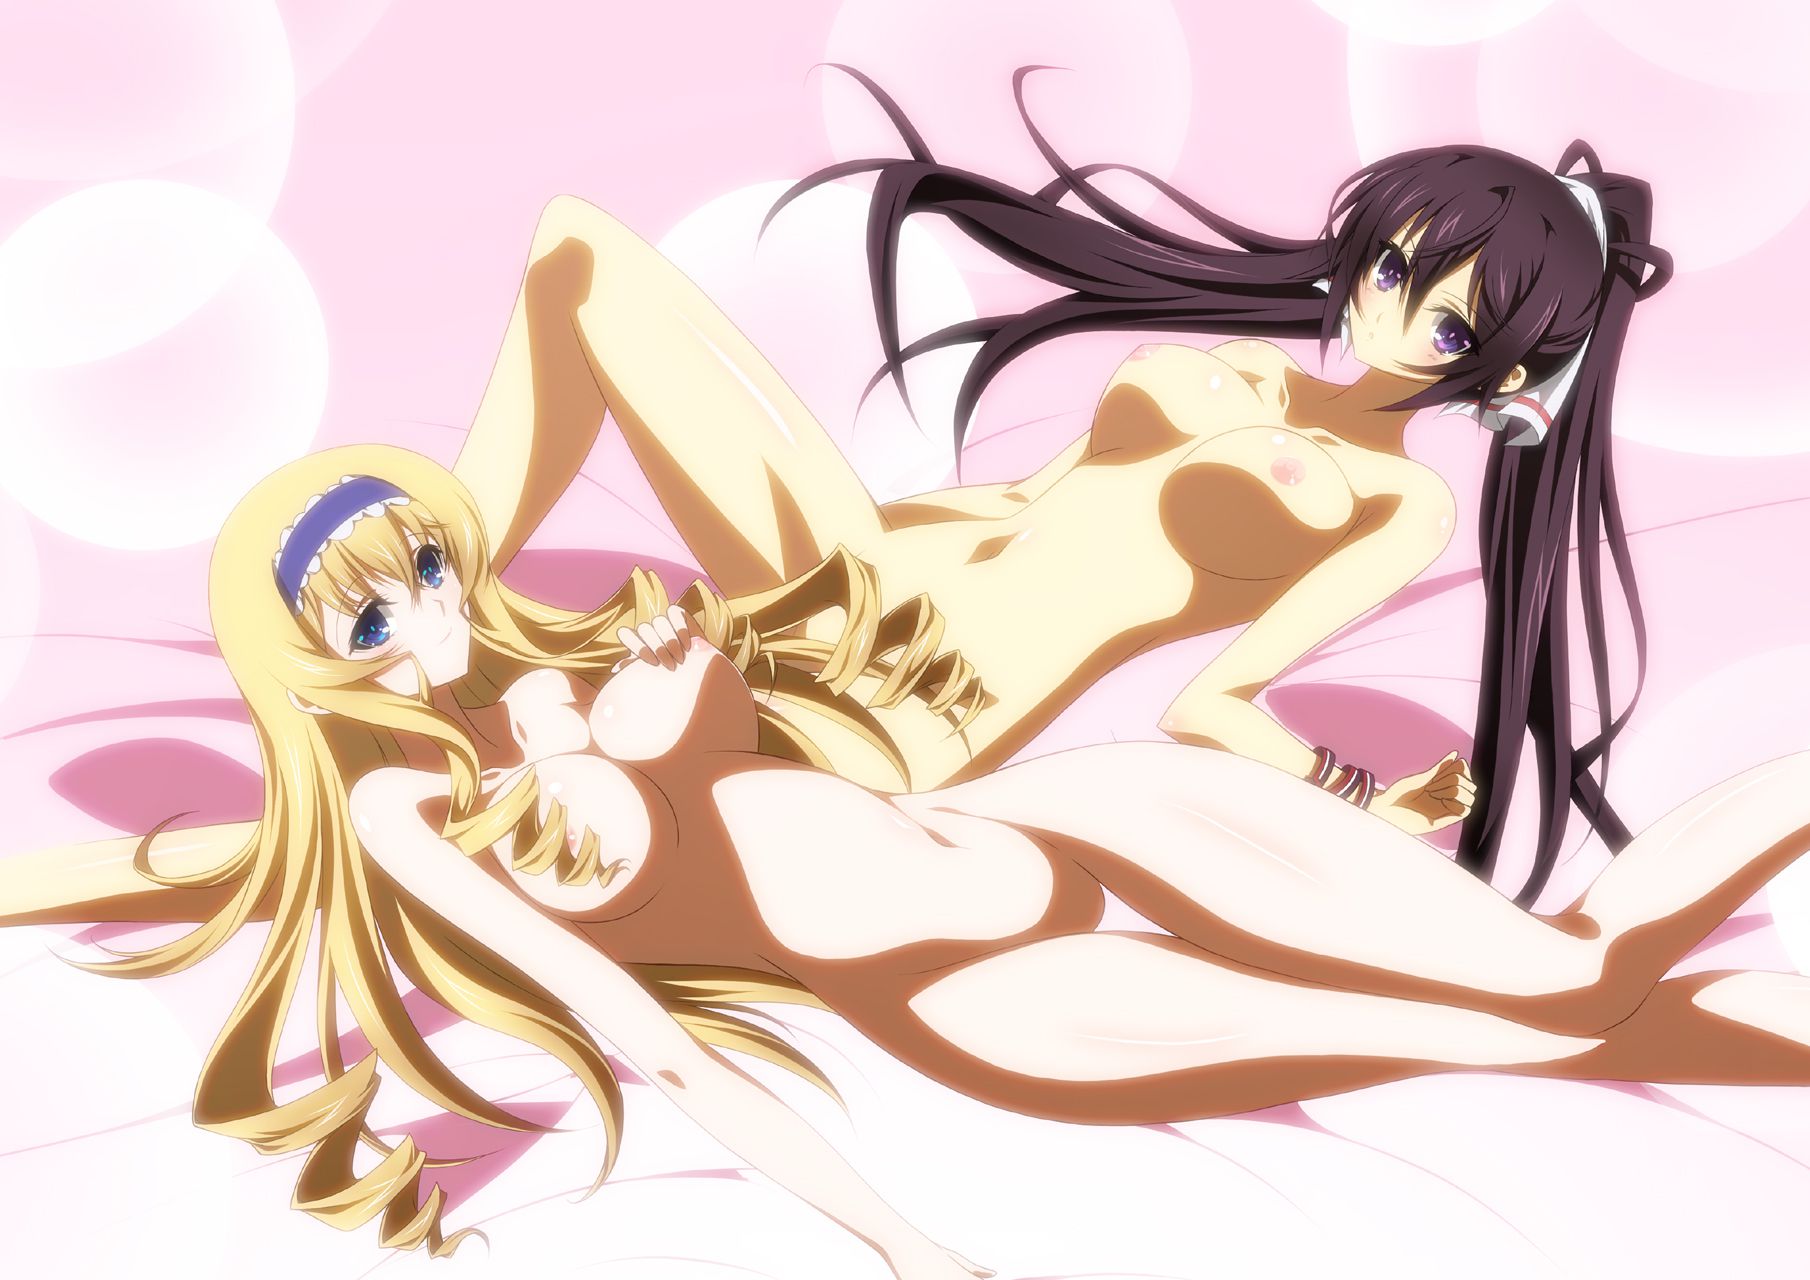 Coming out of the infinitistratos erotic pictures! 35